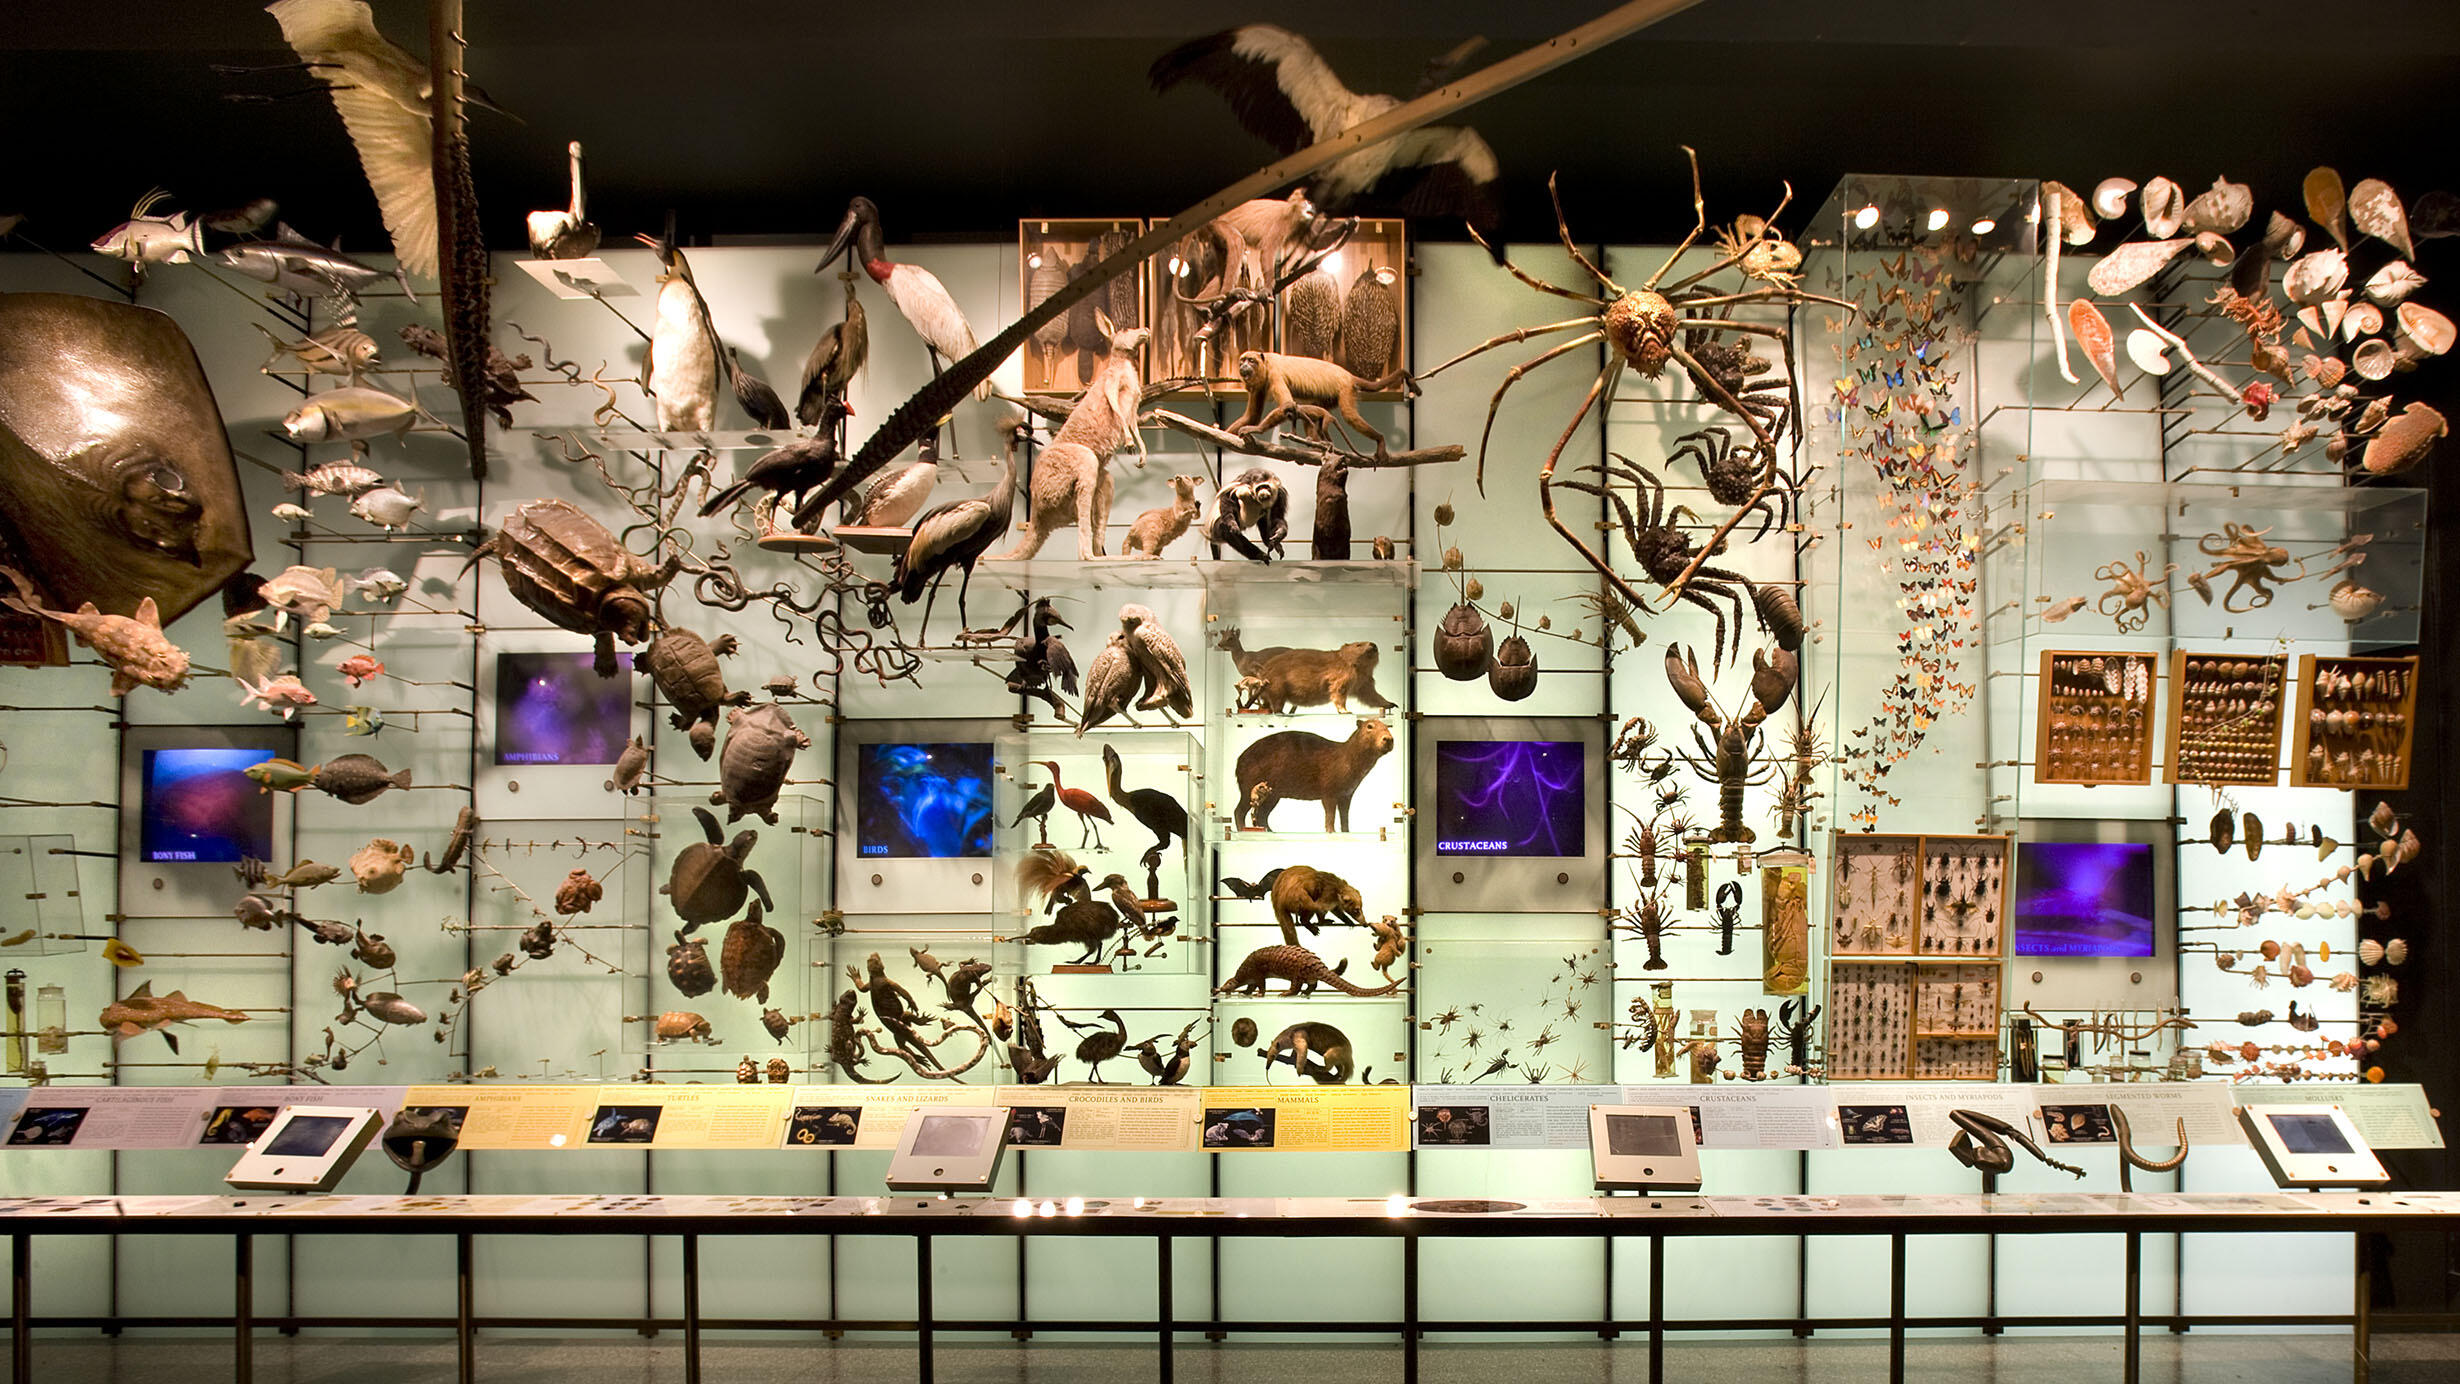 1,500 specimens representing a wide range of bacteria, fungi, plants, and animals are displayed on a long wall in the Hall of Biodiversity.